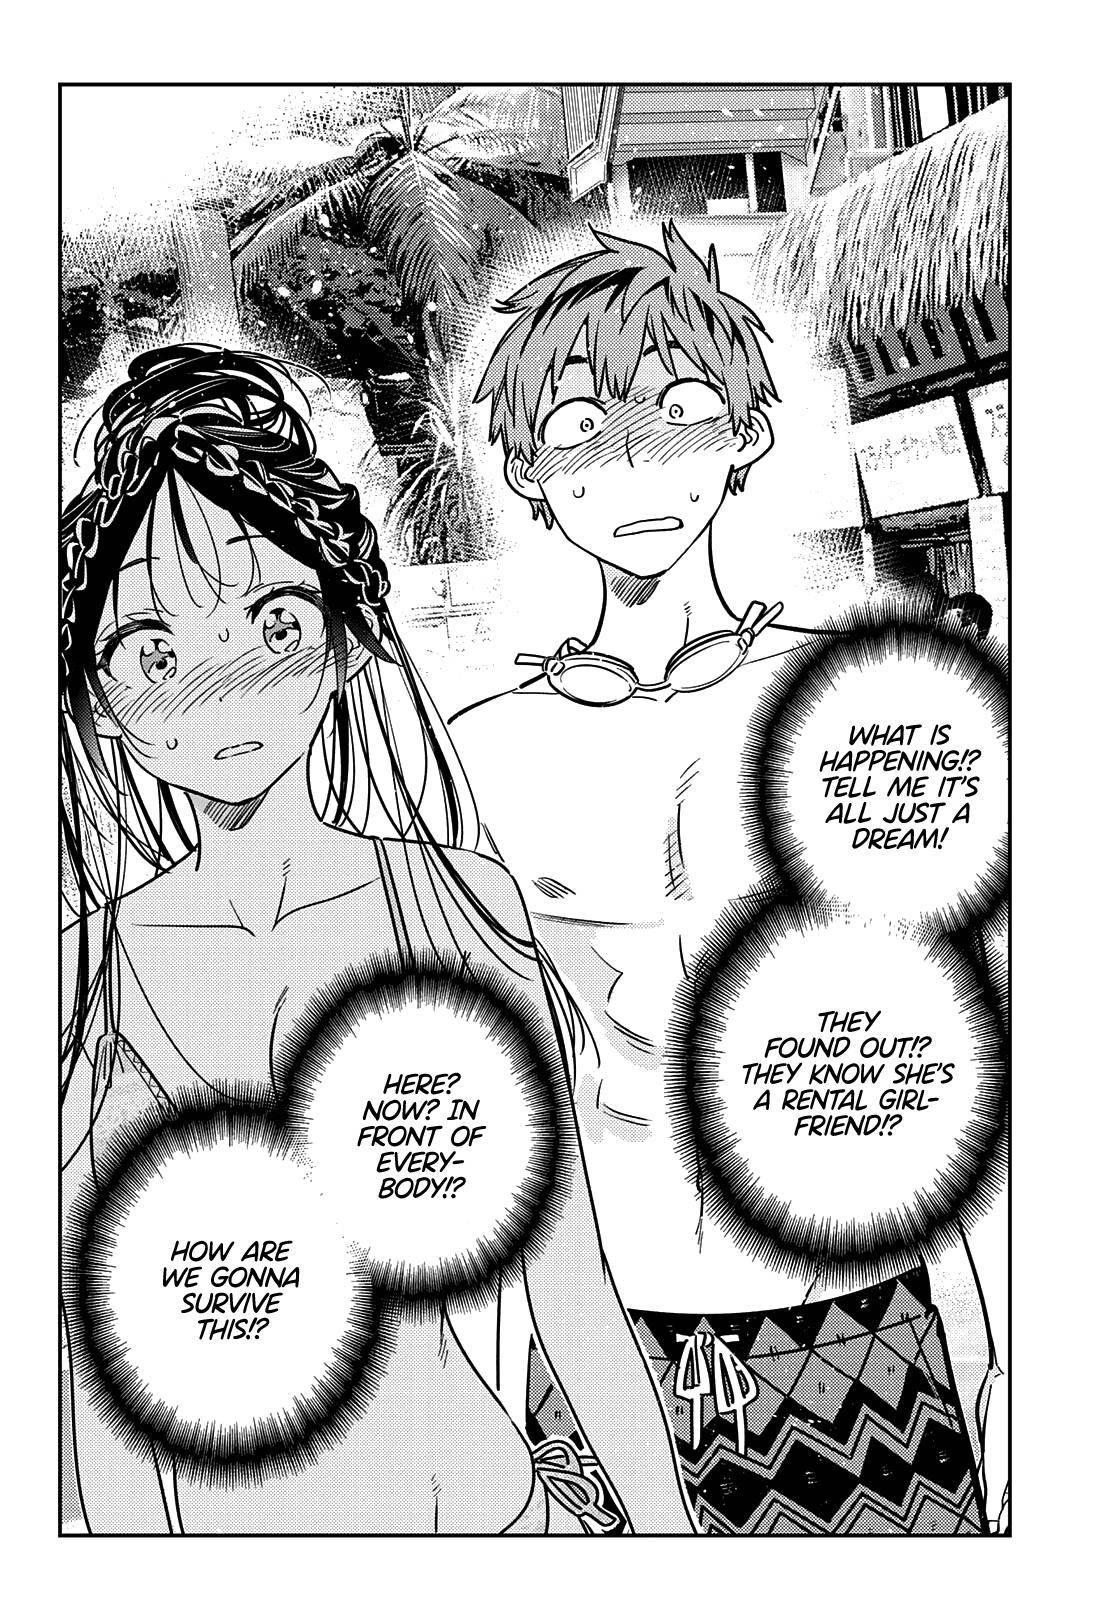 Rent A GirlFriend, Chapter  221 image 14